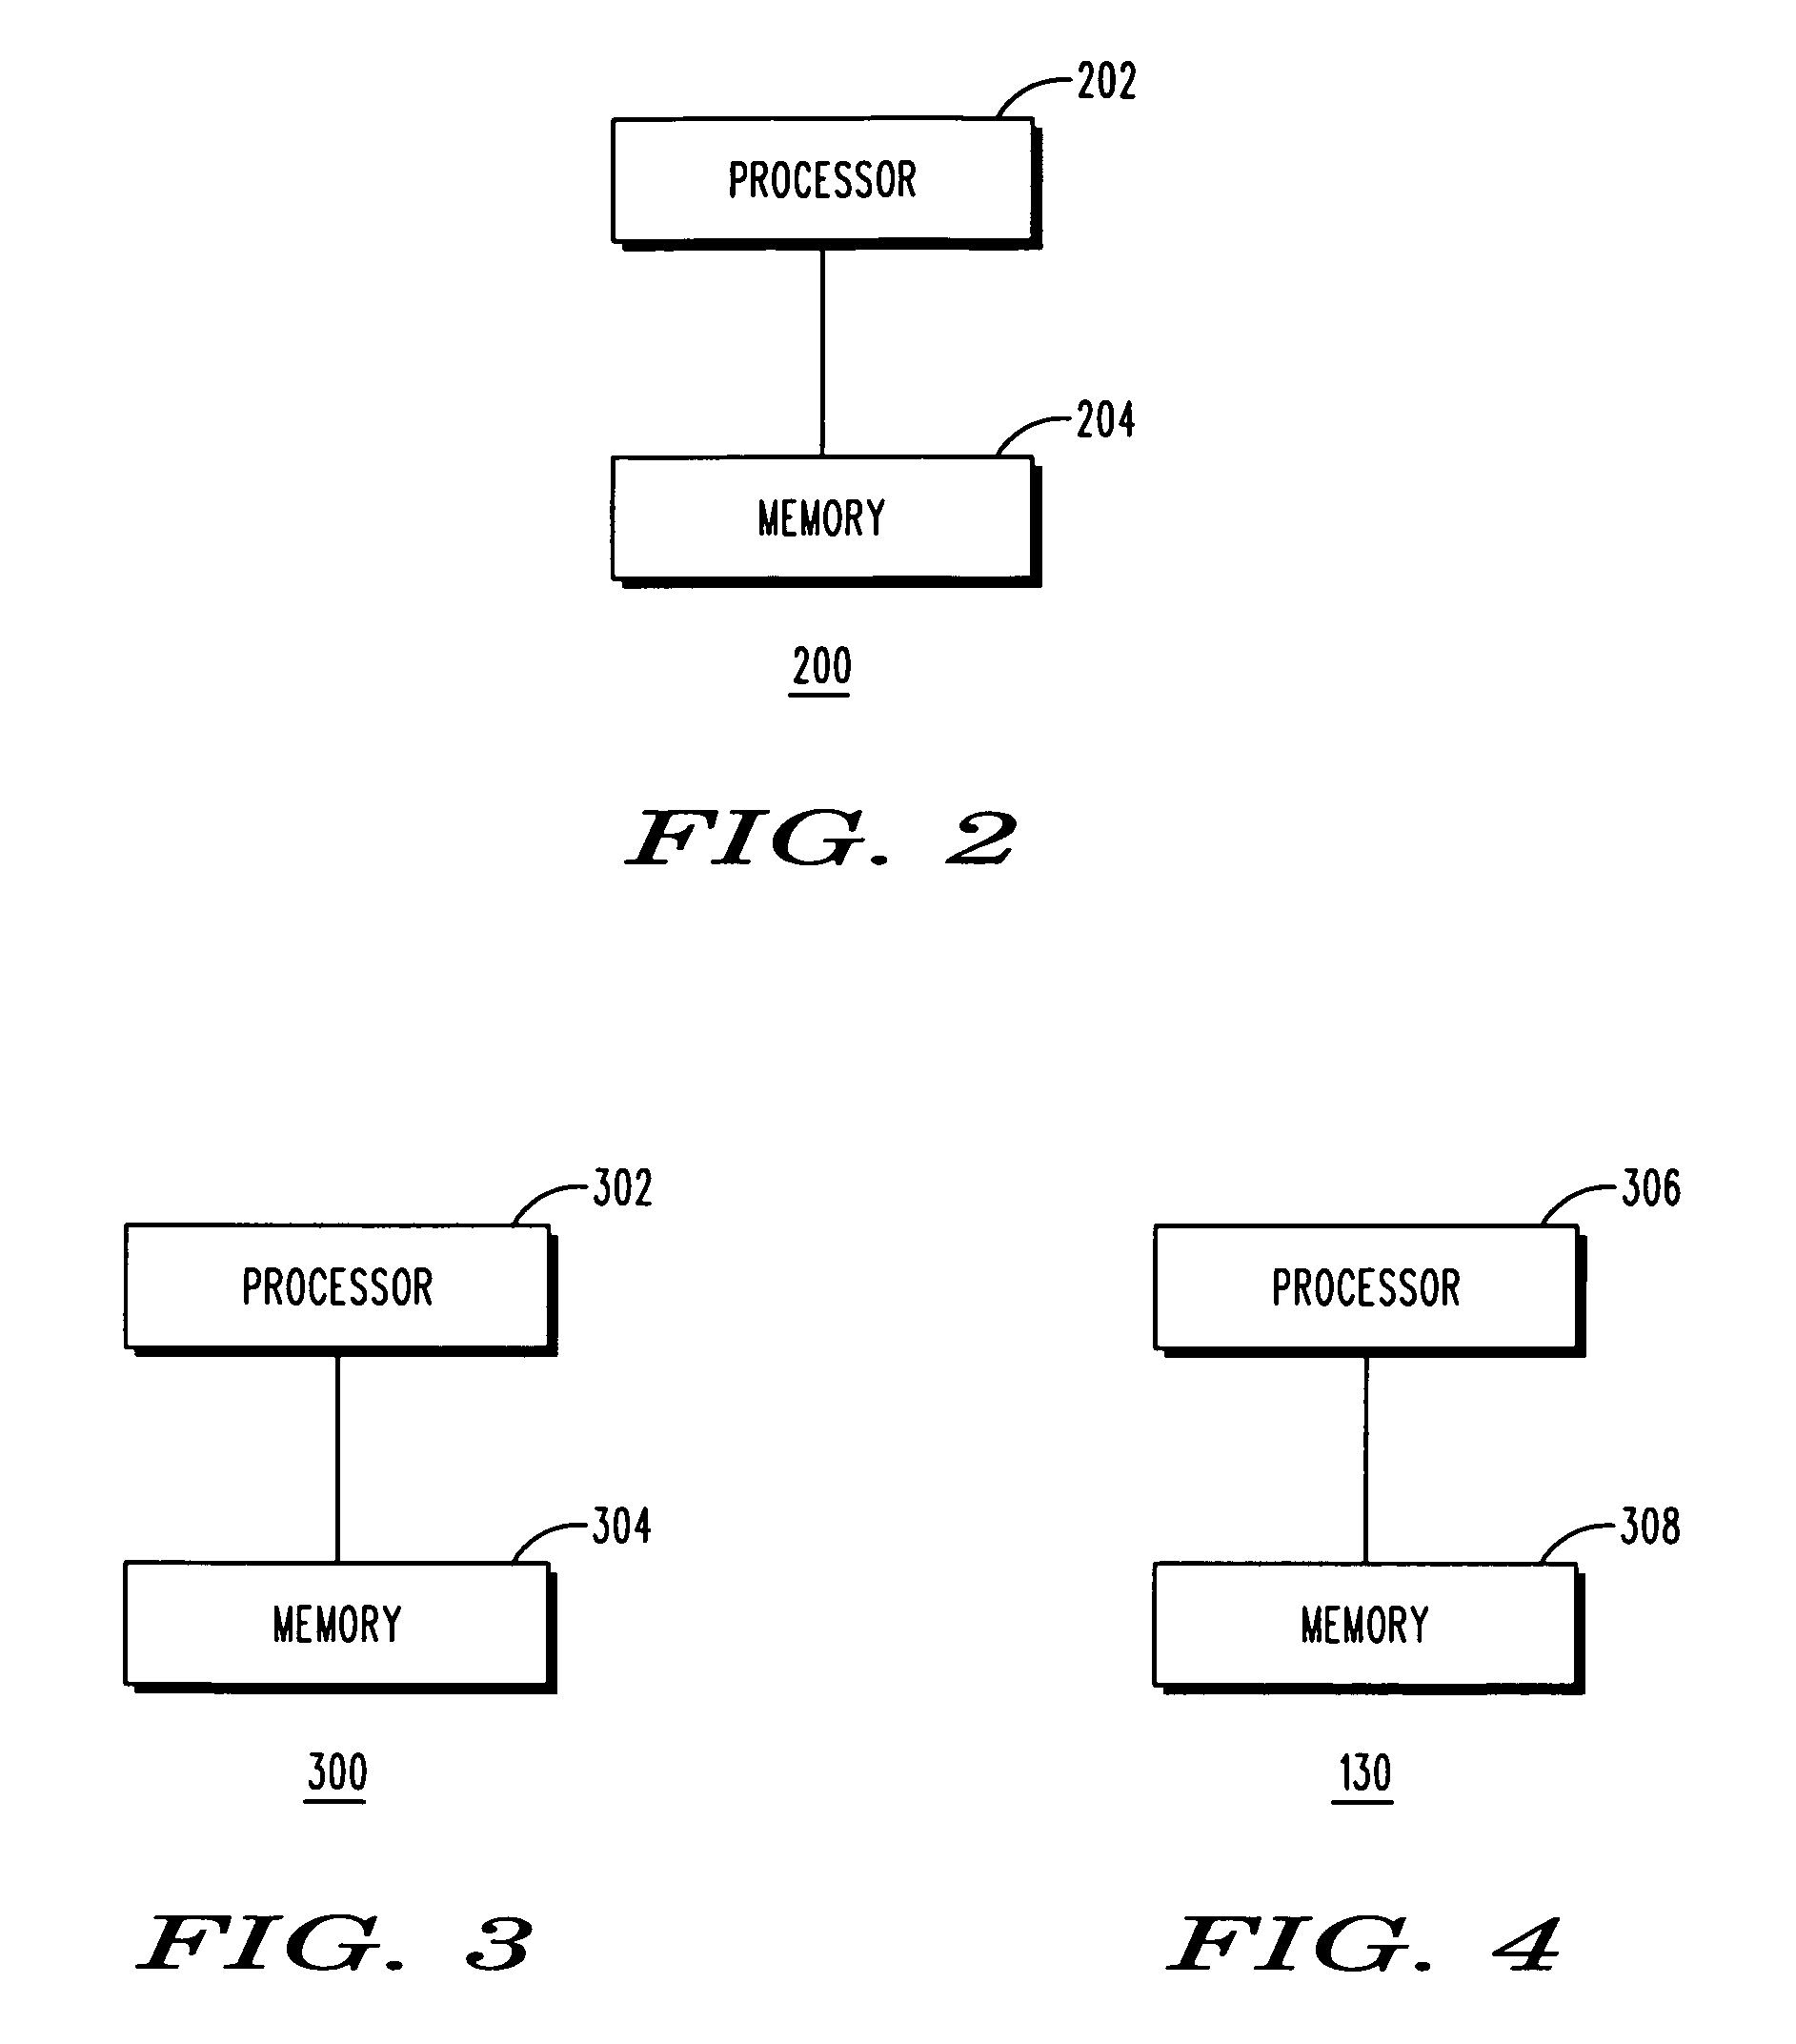 Method and apparatus for uplink power control in a communication system